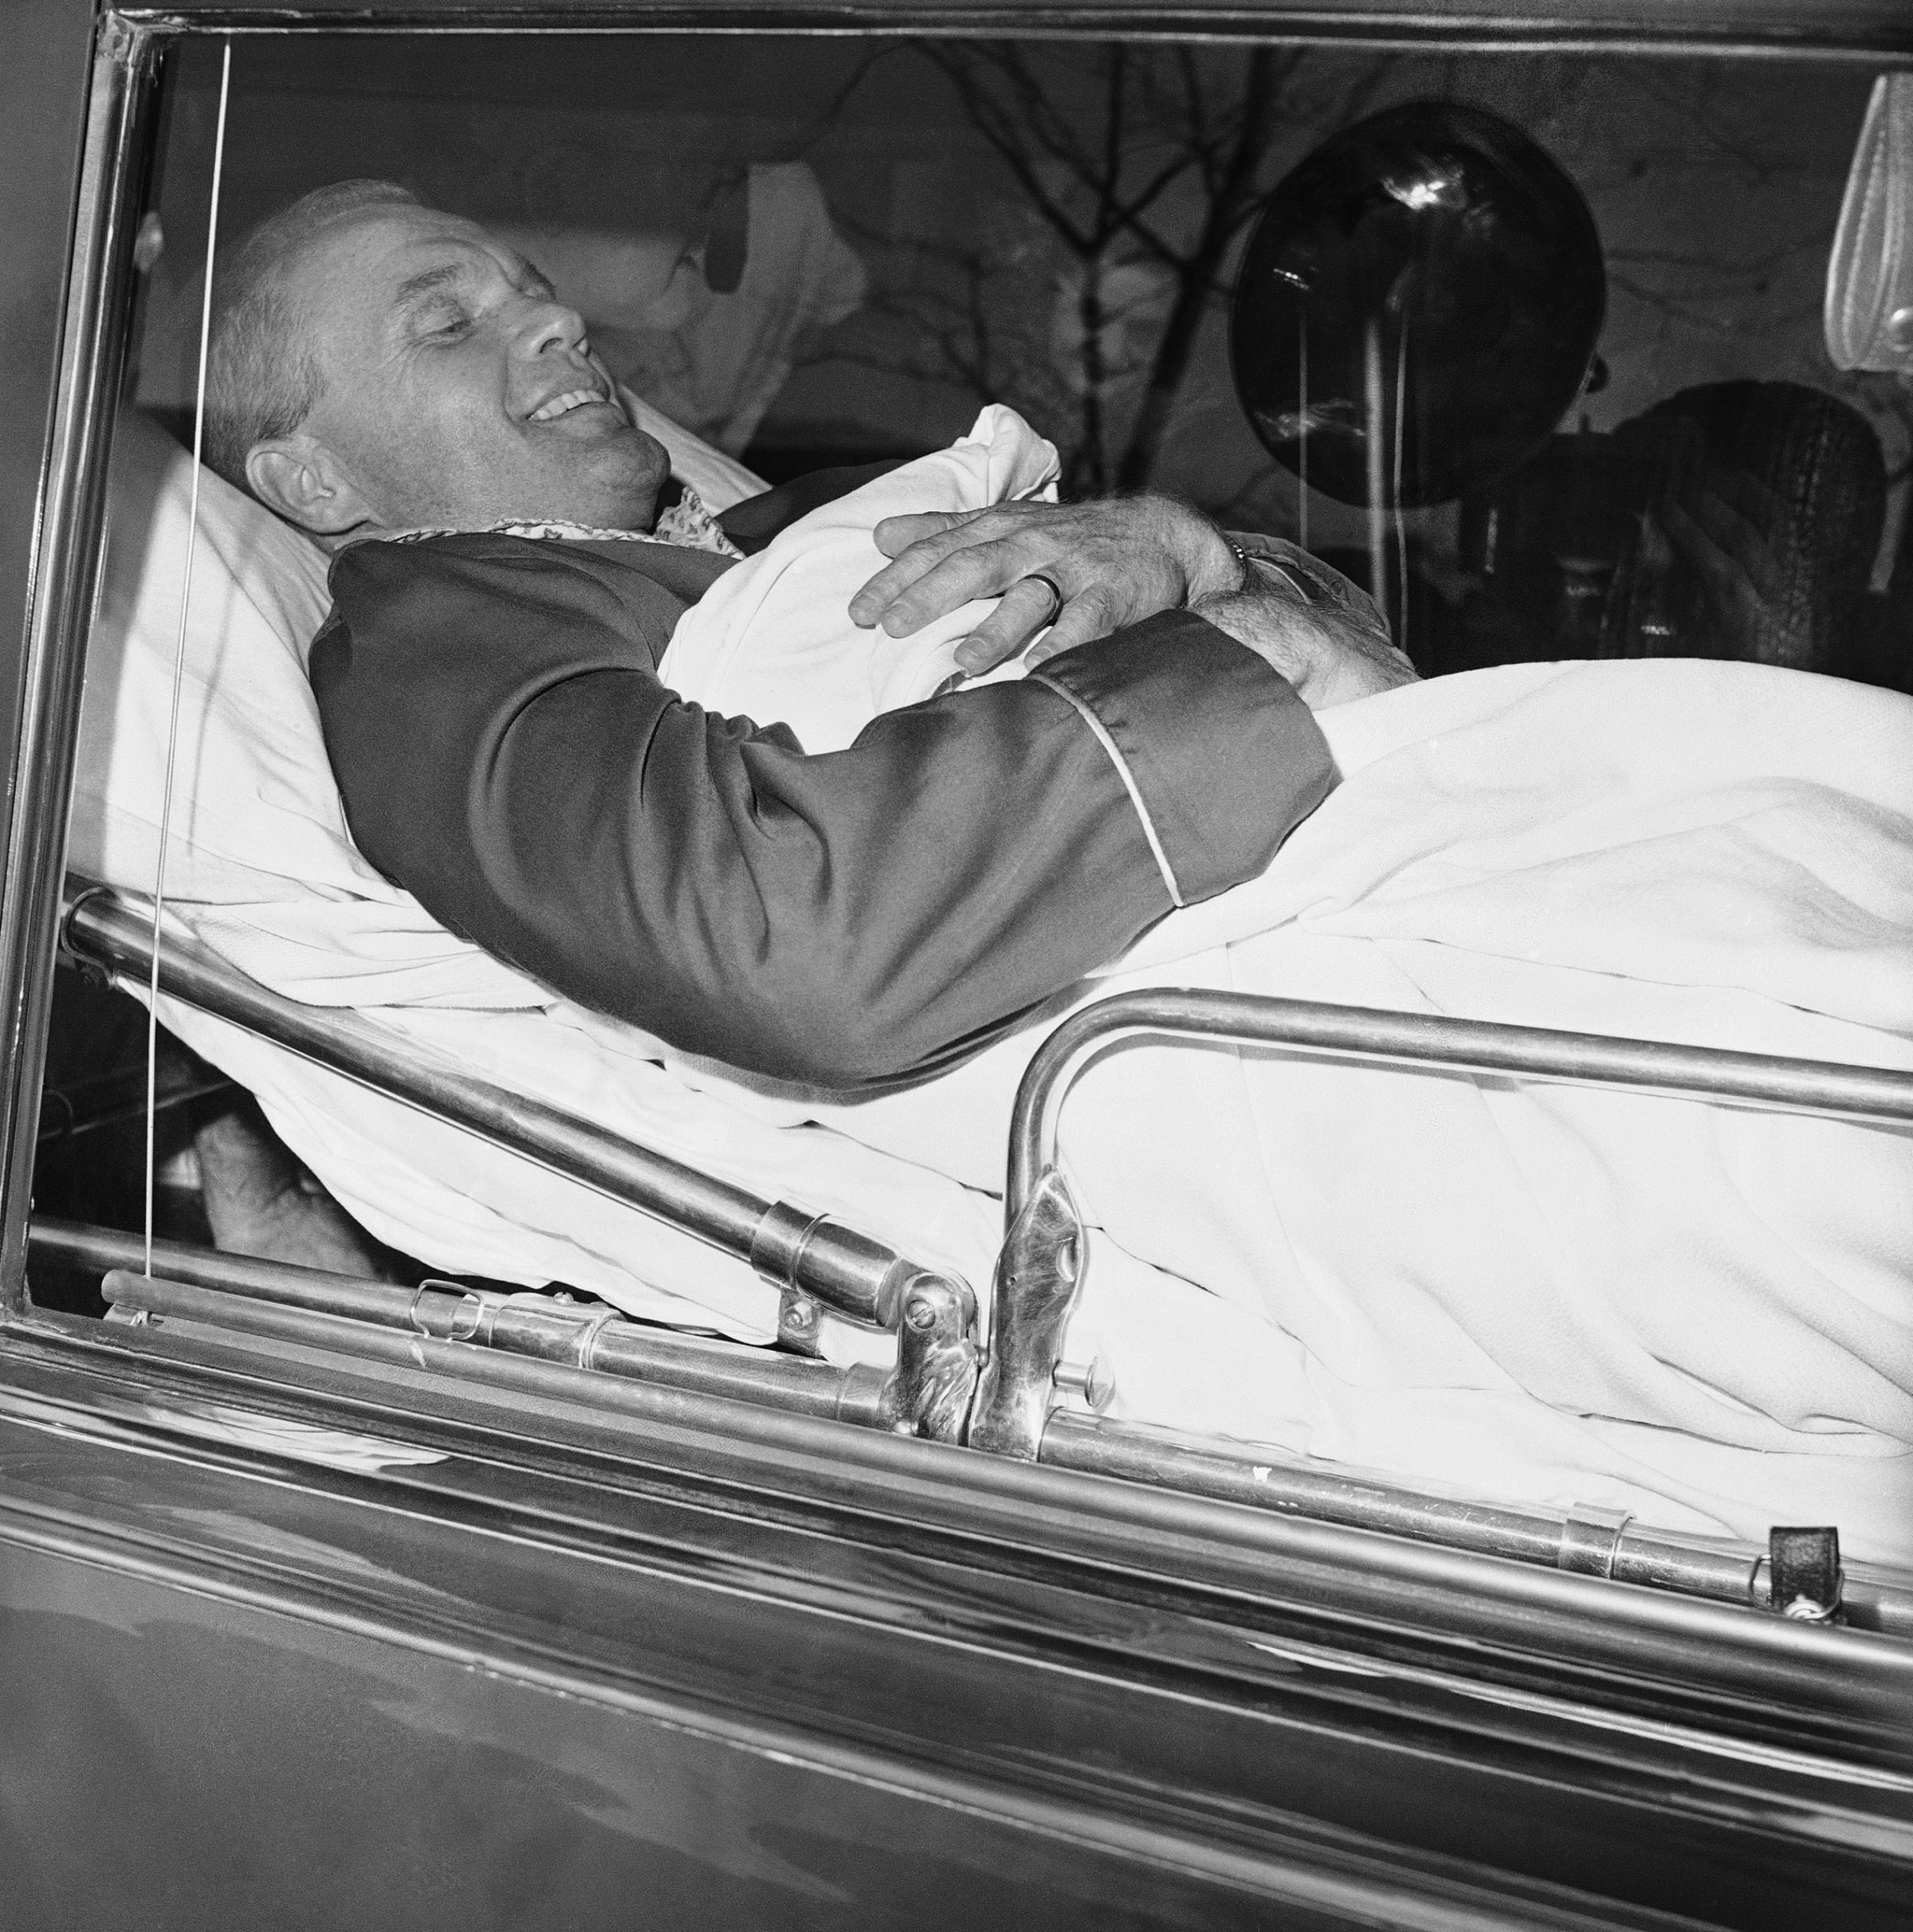 A Medical Mission In an ambulance in Ohio, Glenn prepares to be flown to Lackland Air Force Base in Texas for further treatment of his inner-ear injury in 1964.